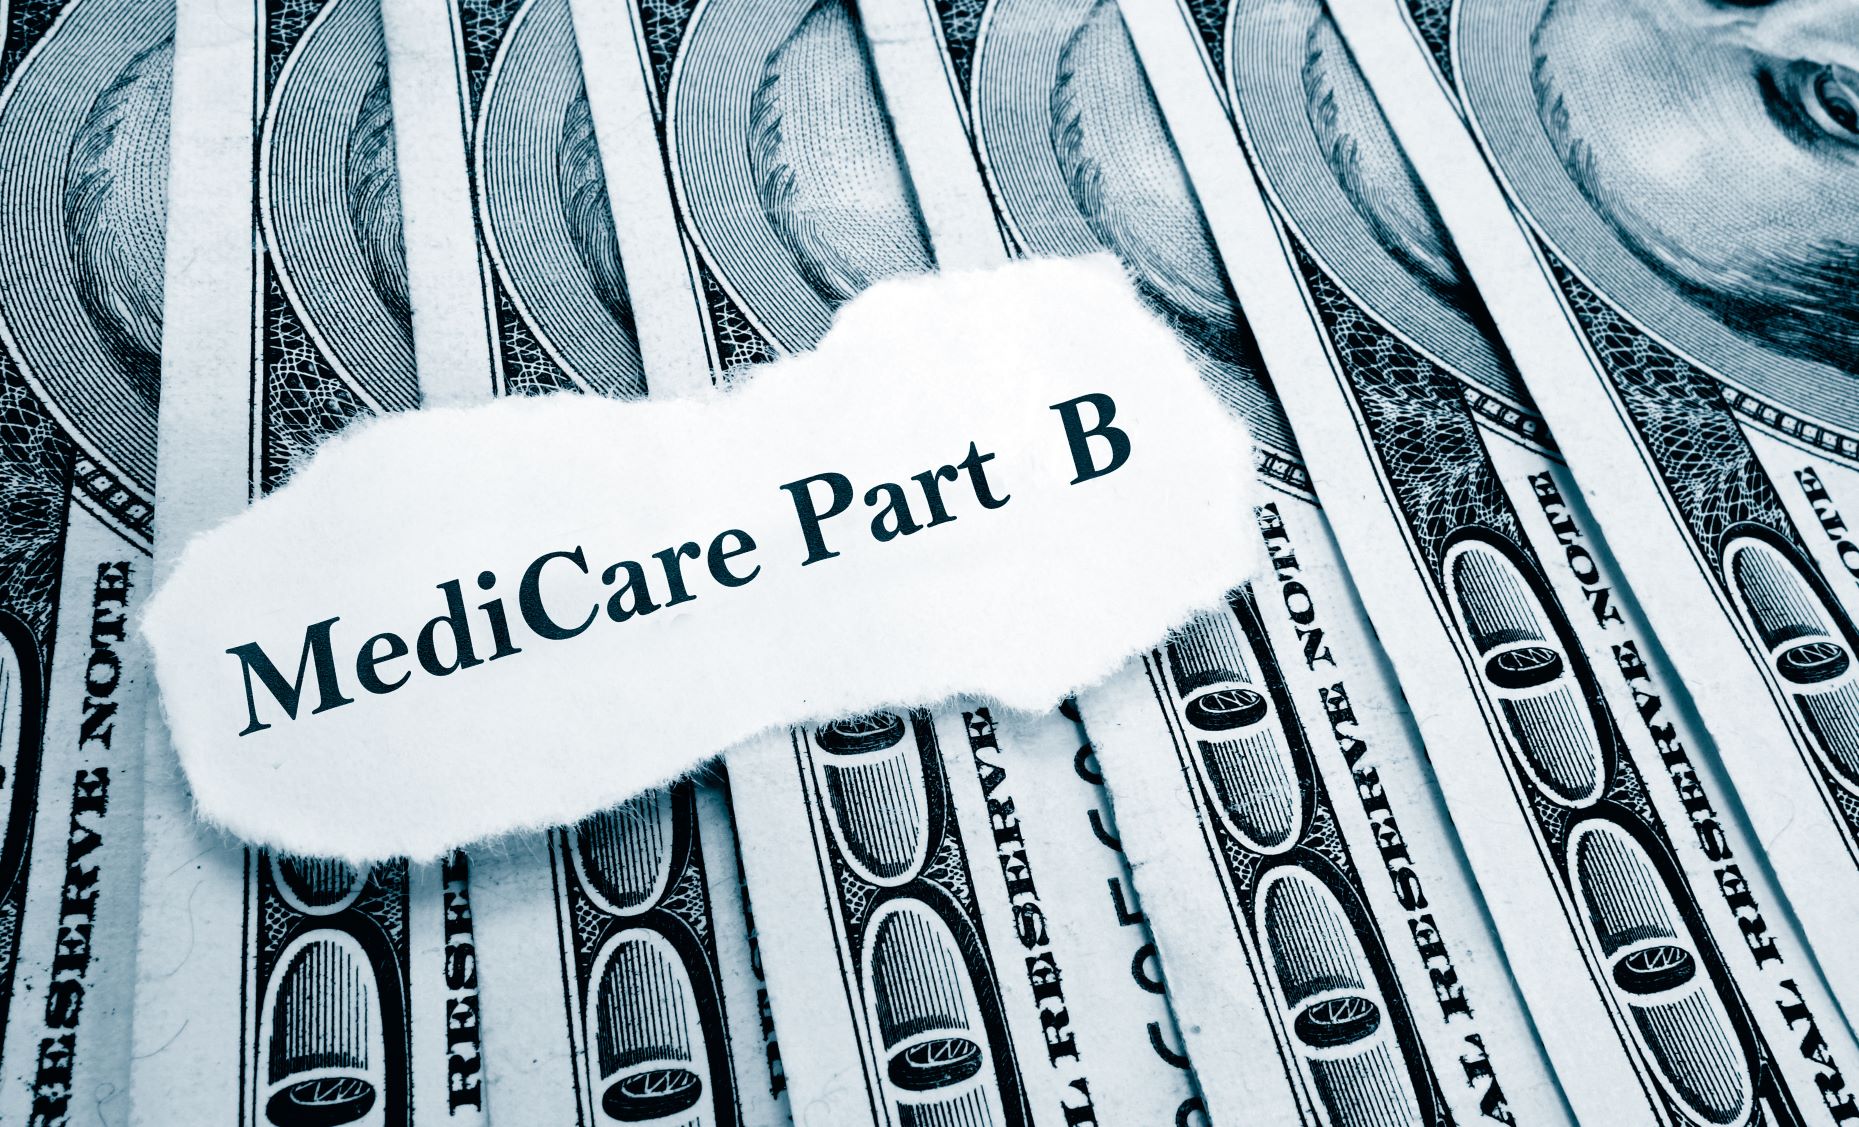 Medicare’s Part B Premium Will Be Unchanged in 2018 But Many Will Pay More